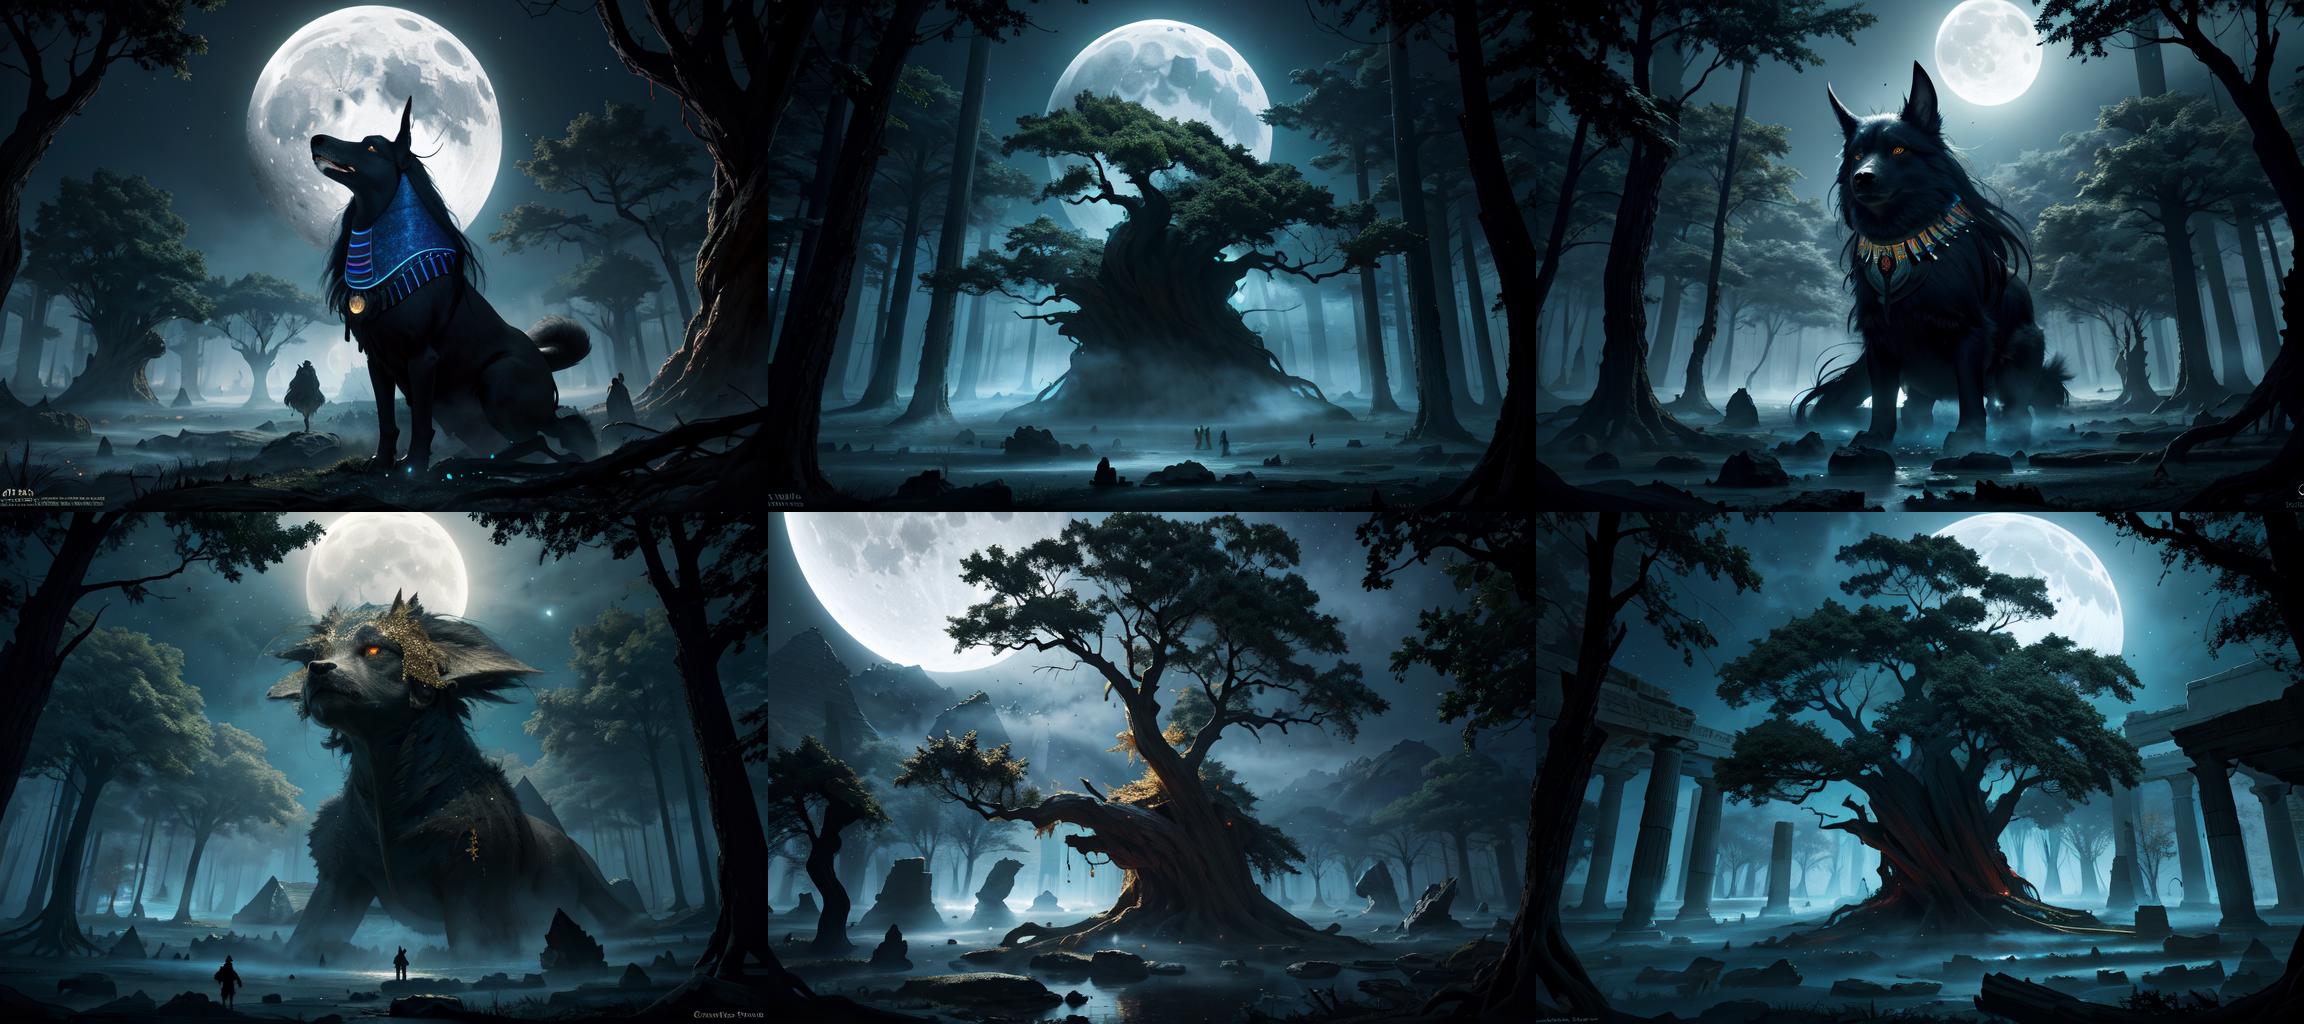 Fantasy Forest image by bluelovers